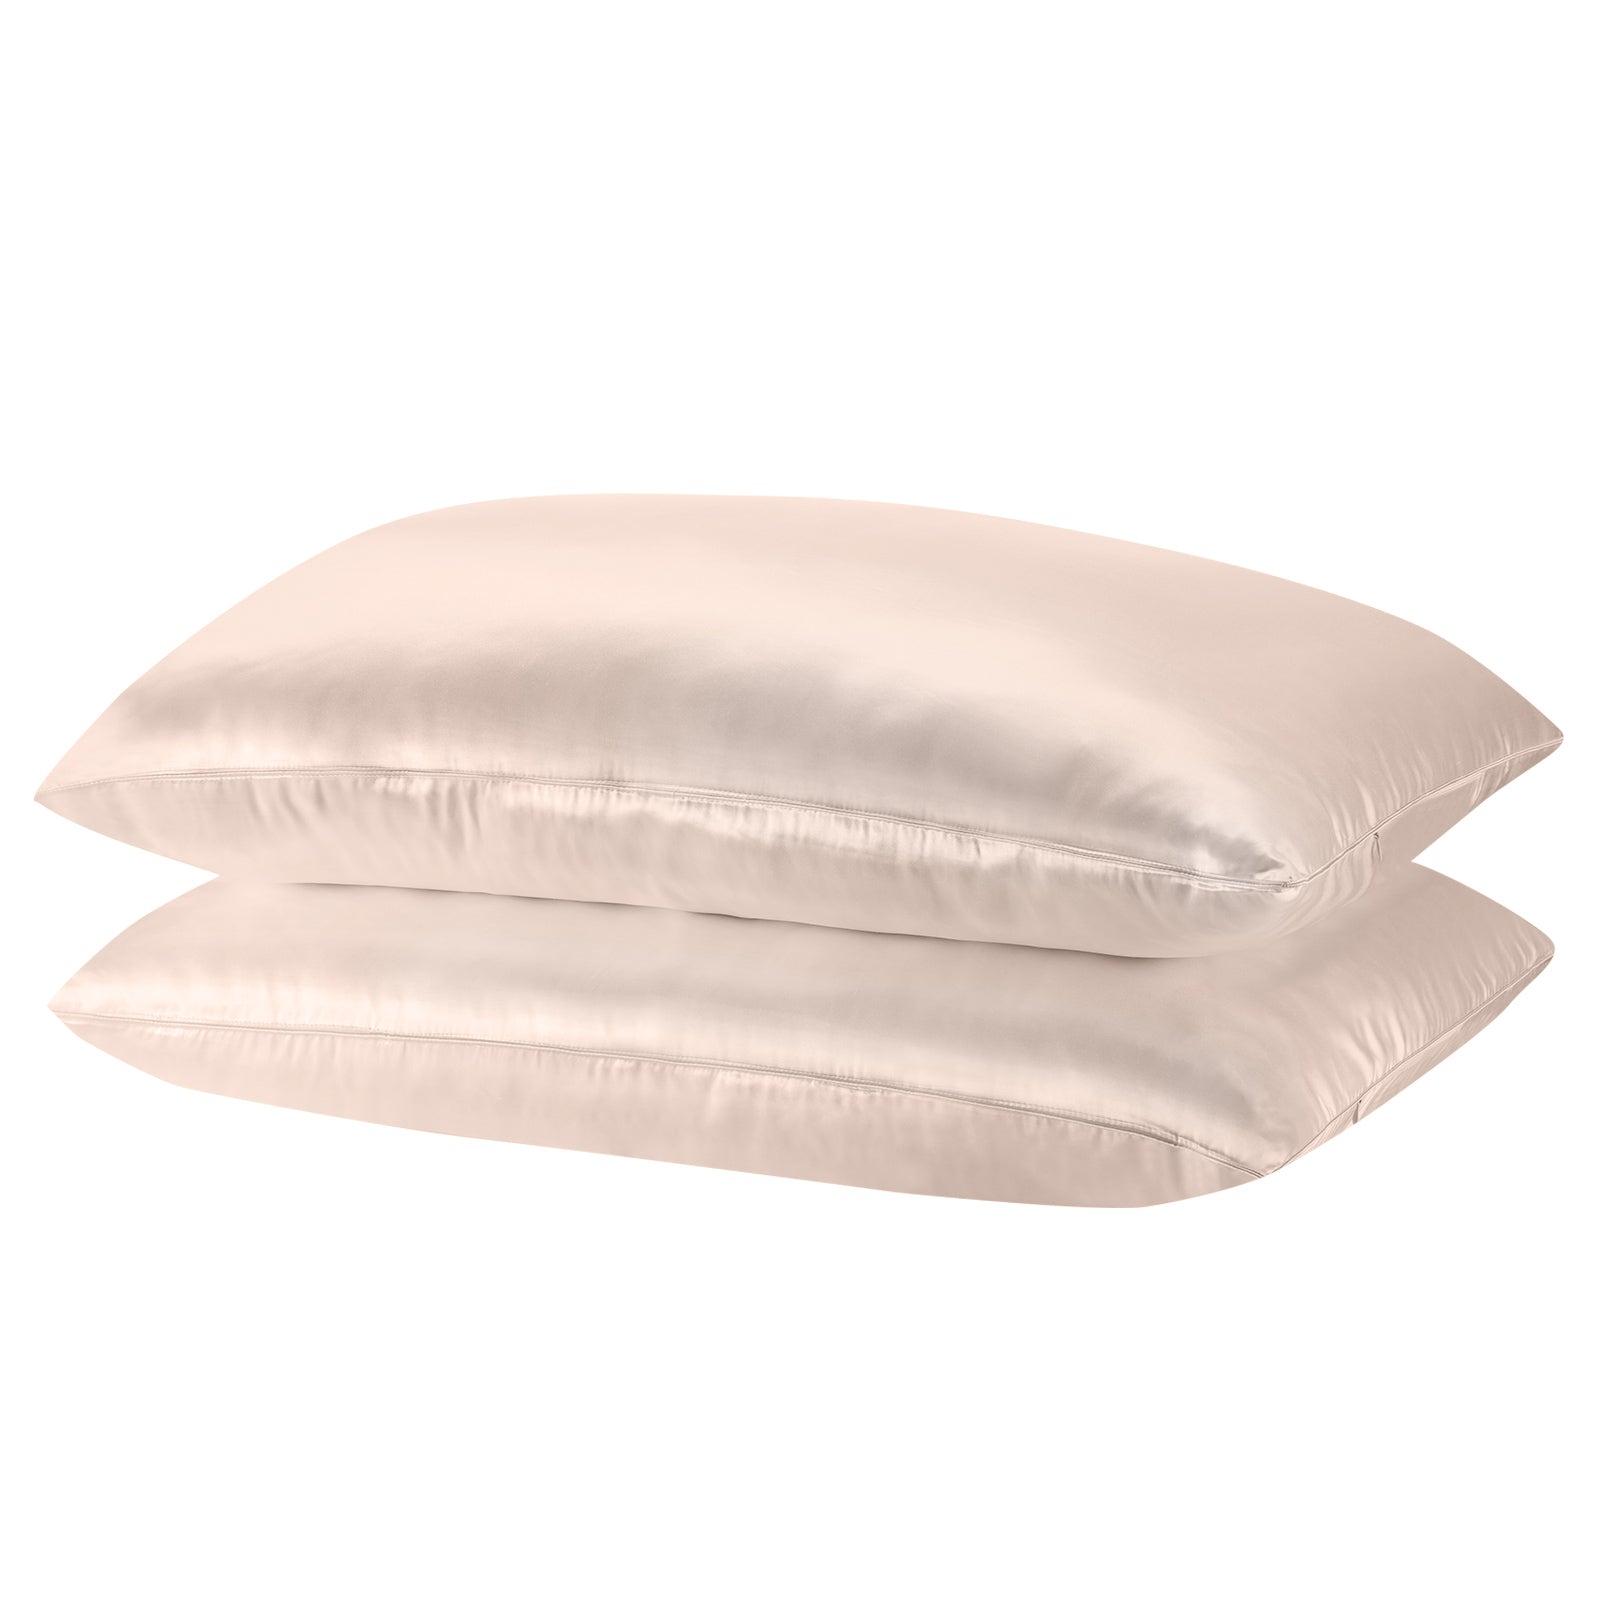 SILK PILLOW CASE TWIN PACK - SIZE: 51X76CM - Champagne Pink